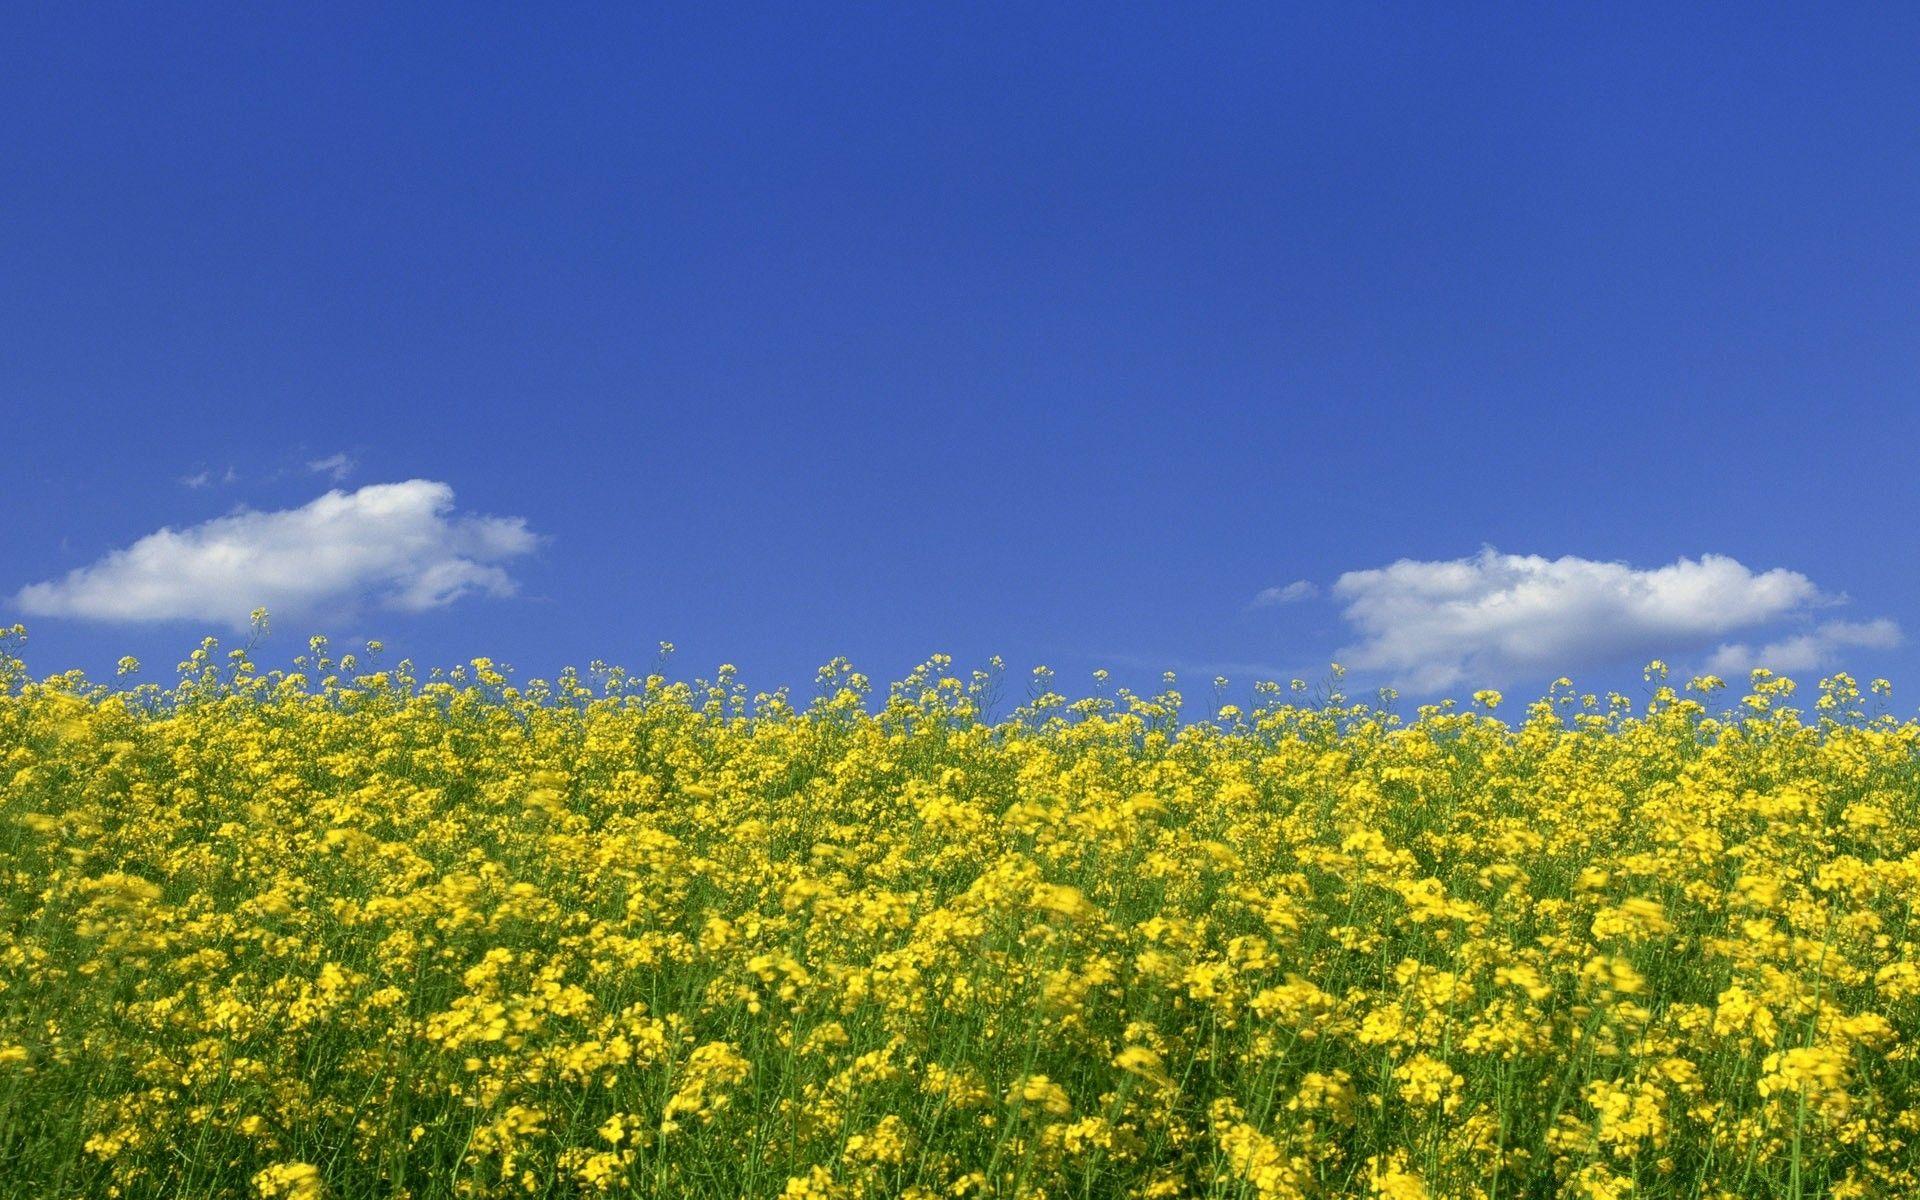 Mustard Flower Field 1. Android wallpaper for free